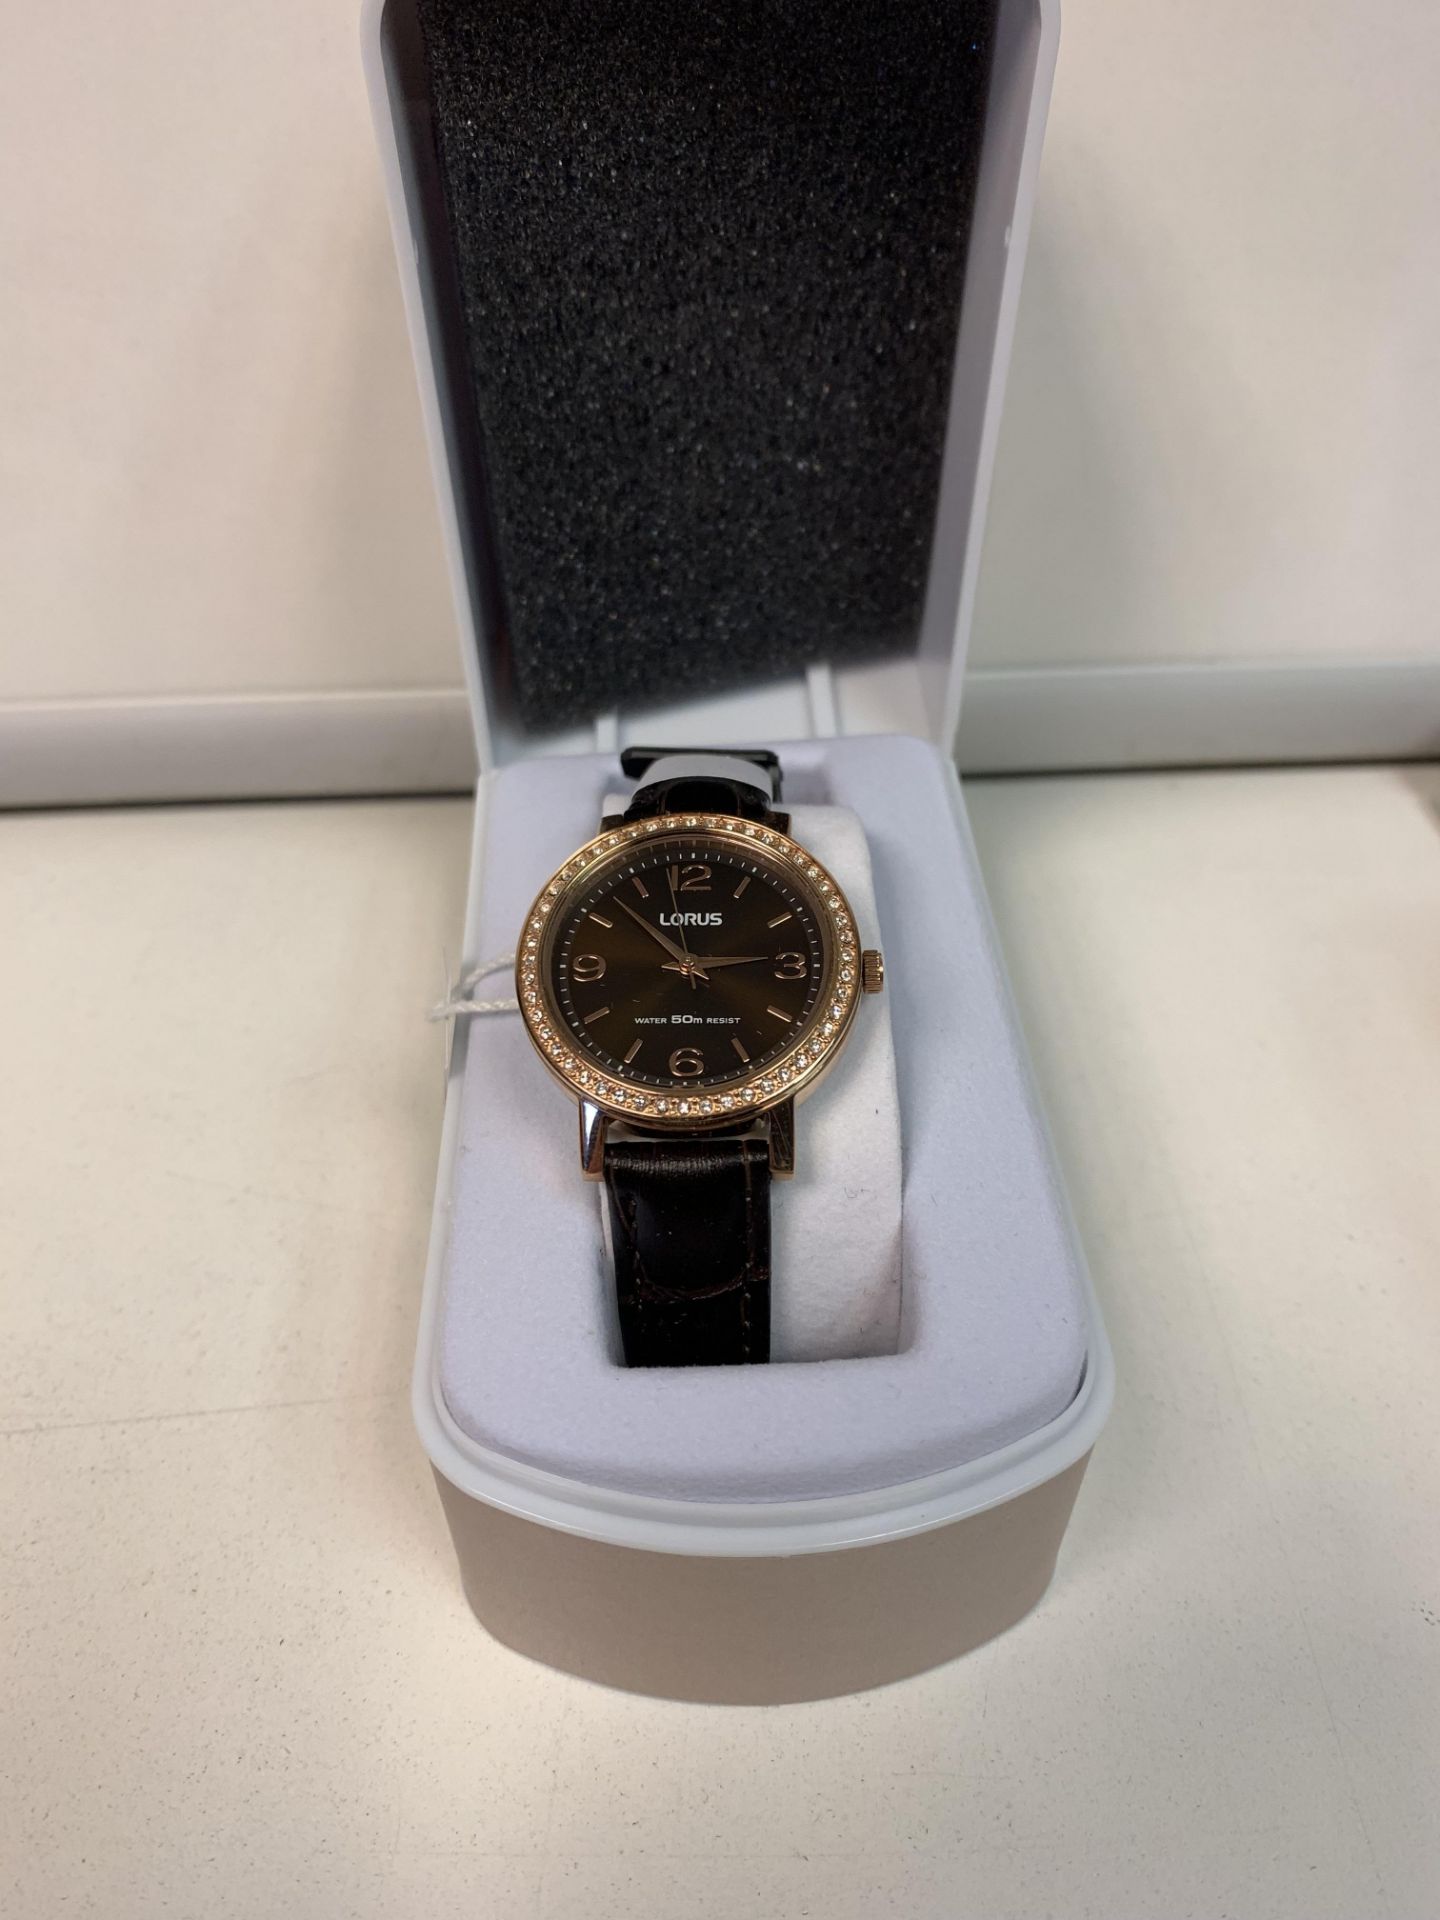 BOXED BRAND NEW Lorus Rose Gold Plated BLAC Leather Strap Watch RRP £70